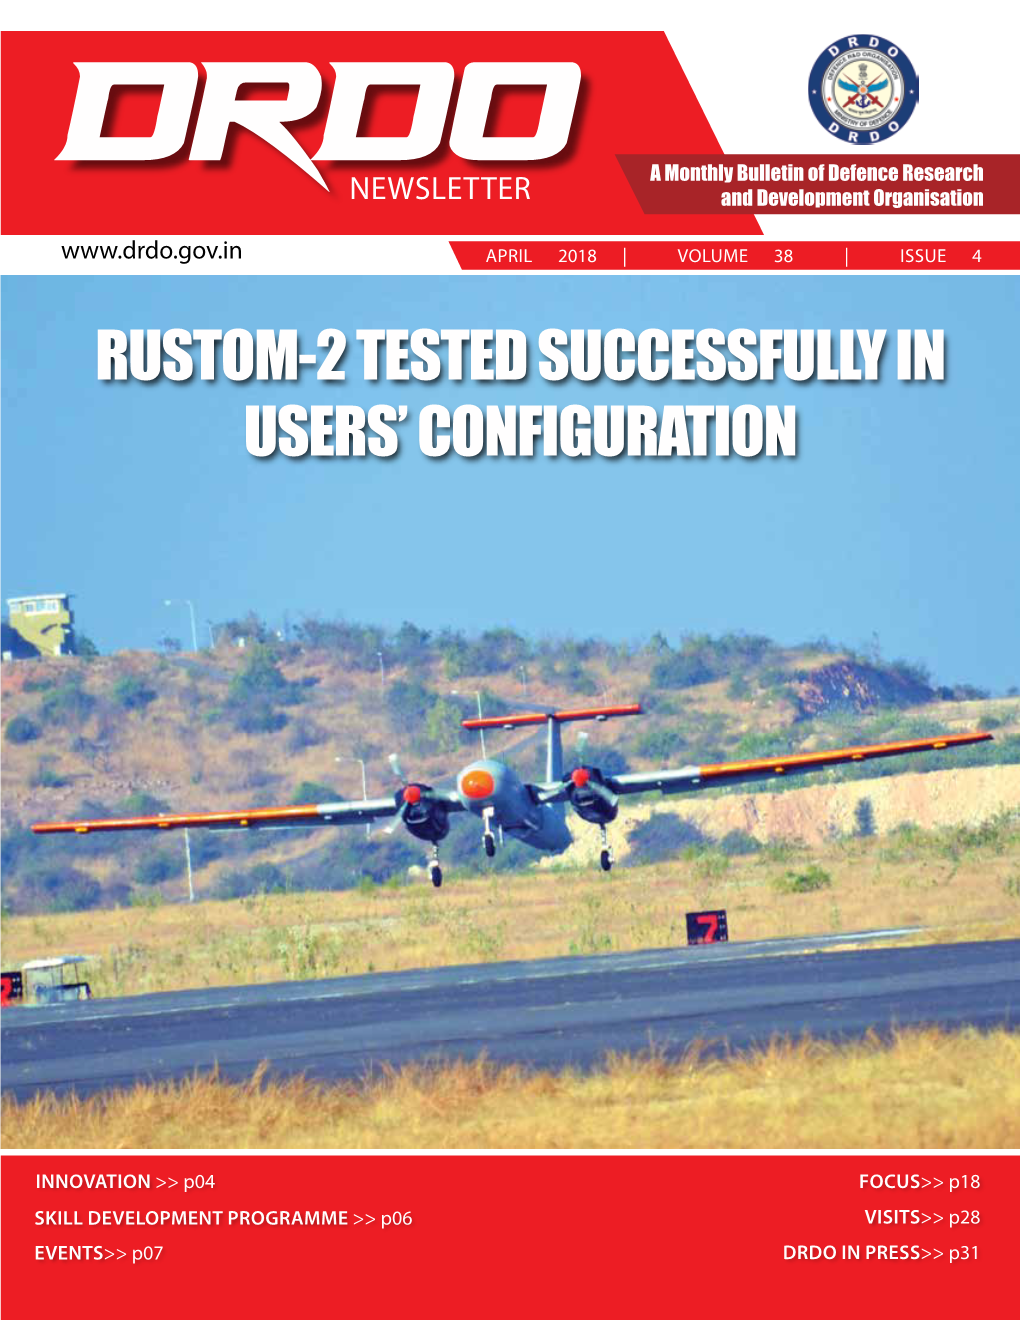 Rustom-2 Tested Successfully in Users' Configuration